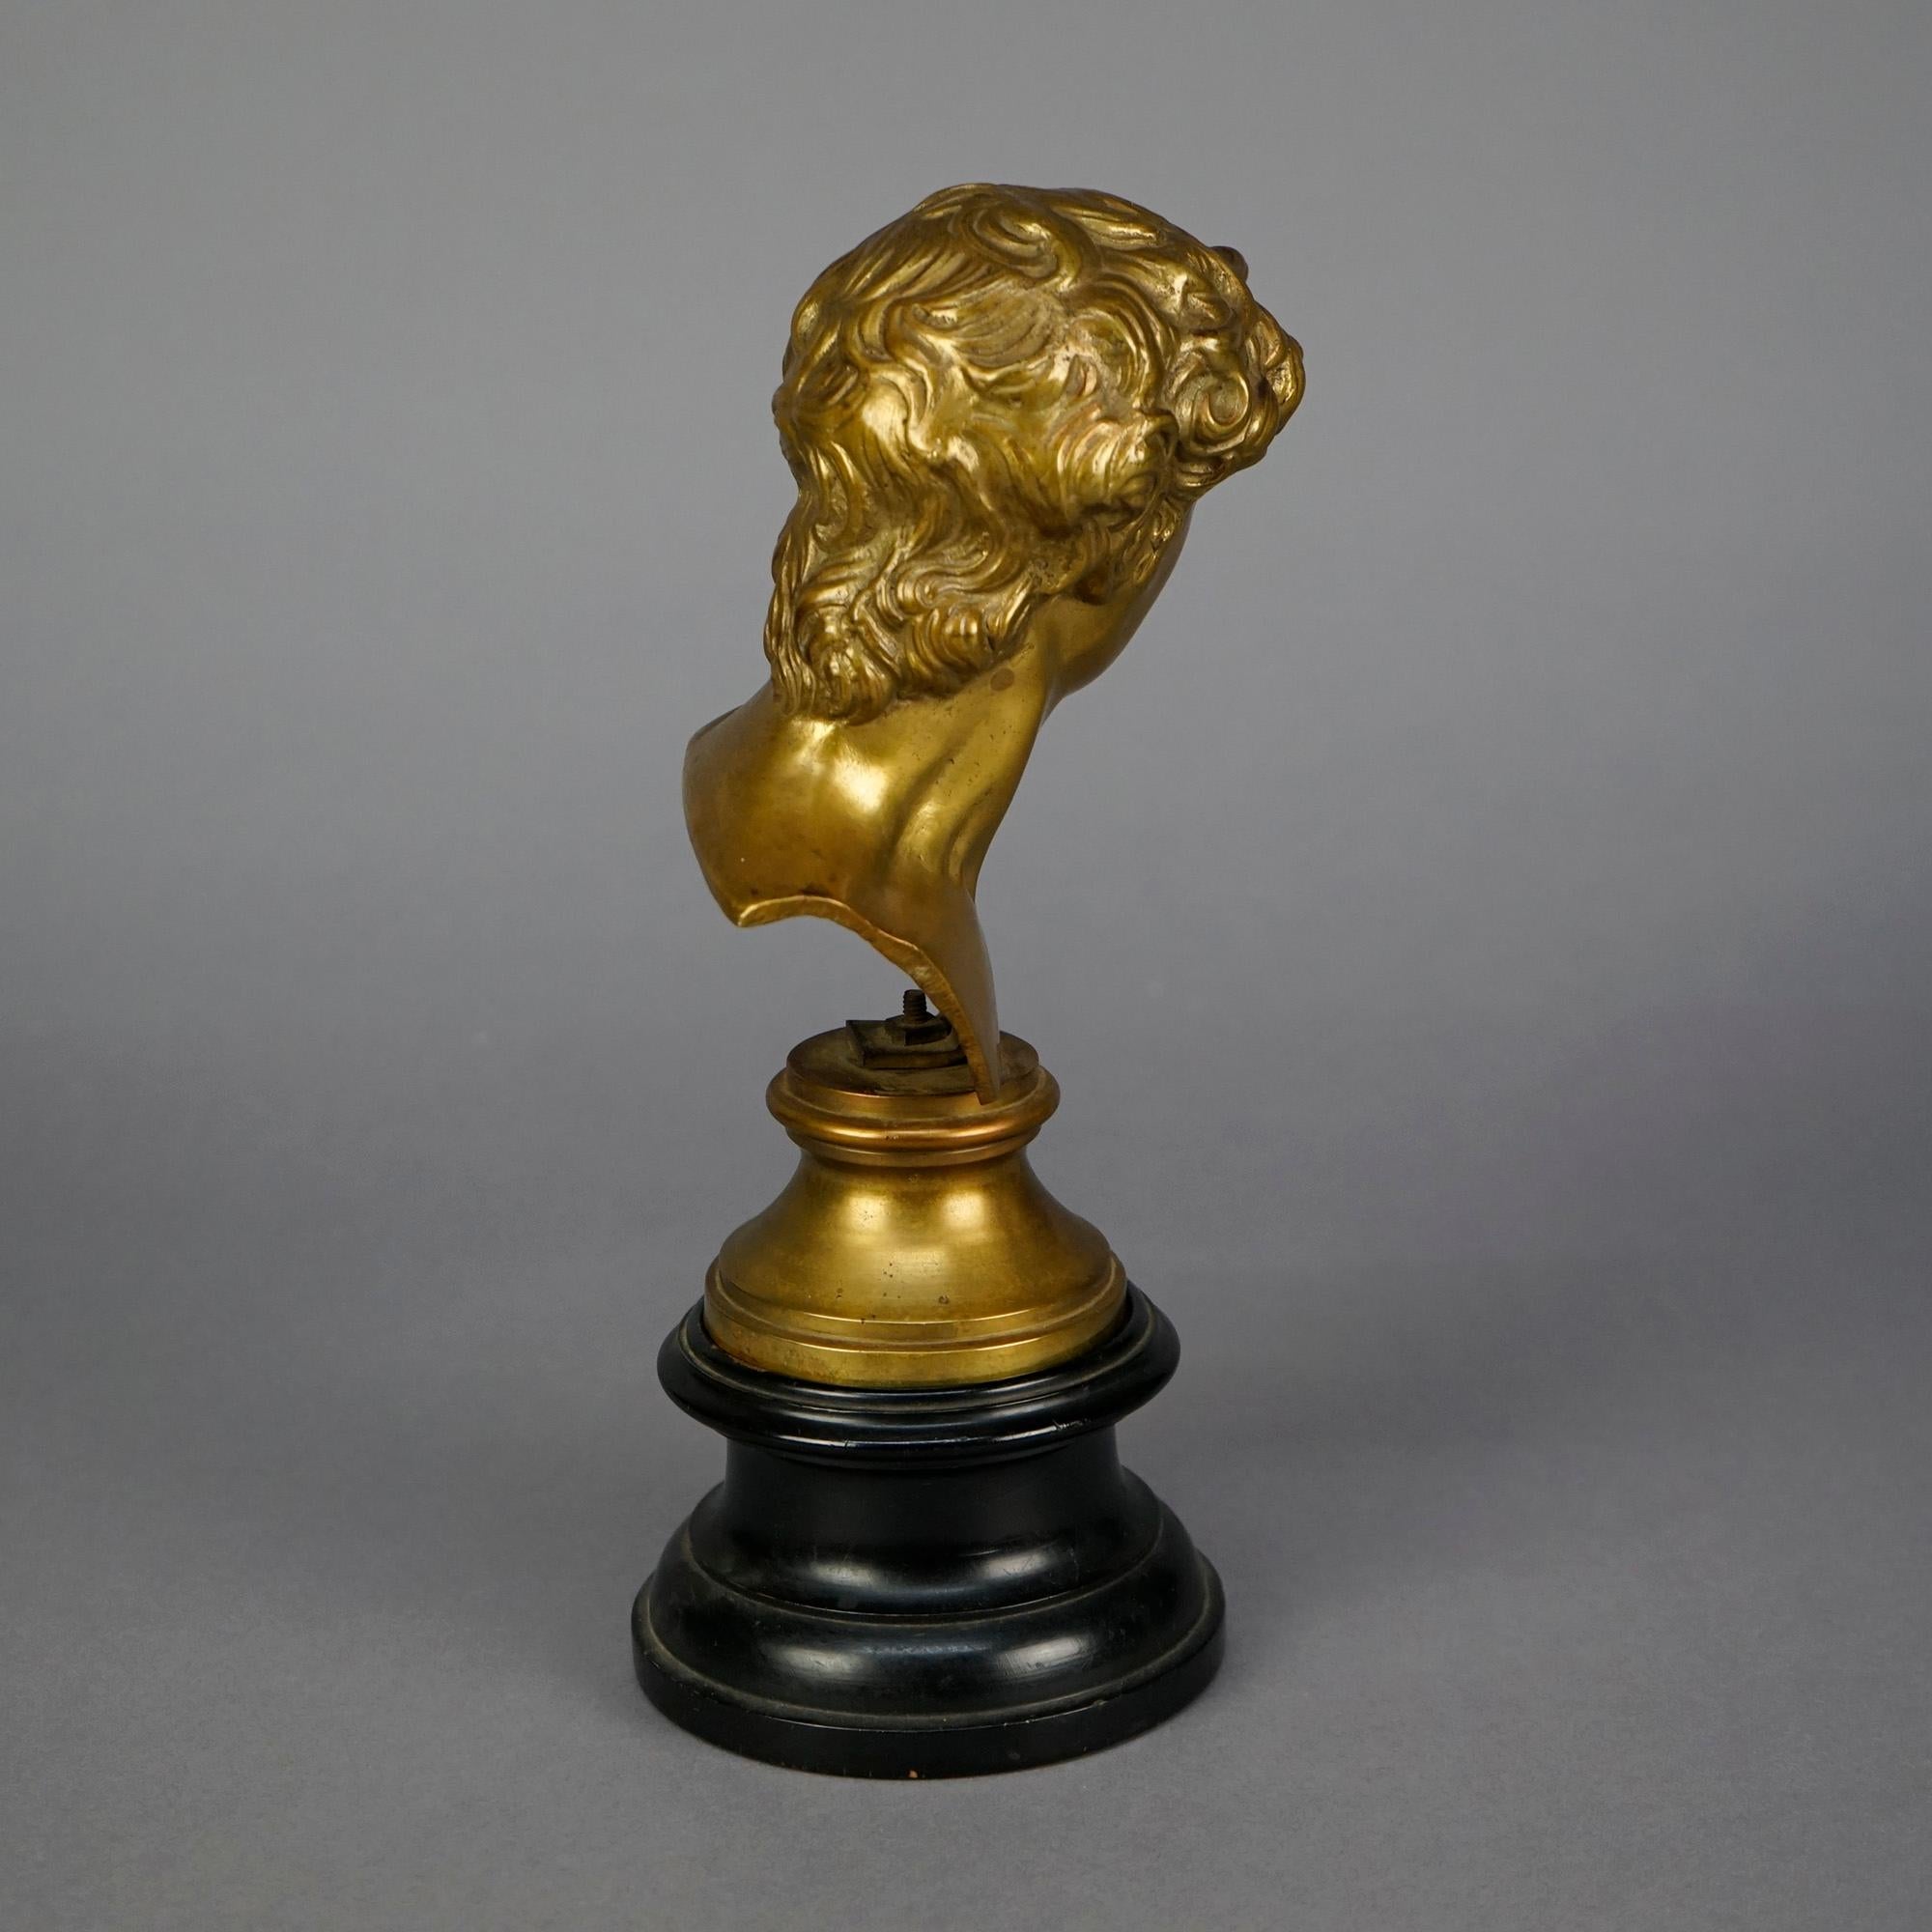 Antique Neoclassical Gilt Bronze Bust Sculpture of a Classical Man, 19th C For Sale 4